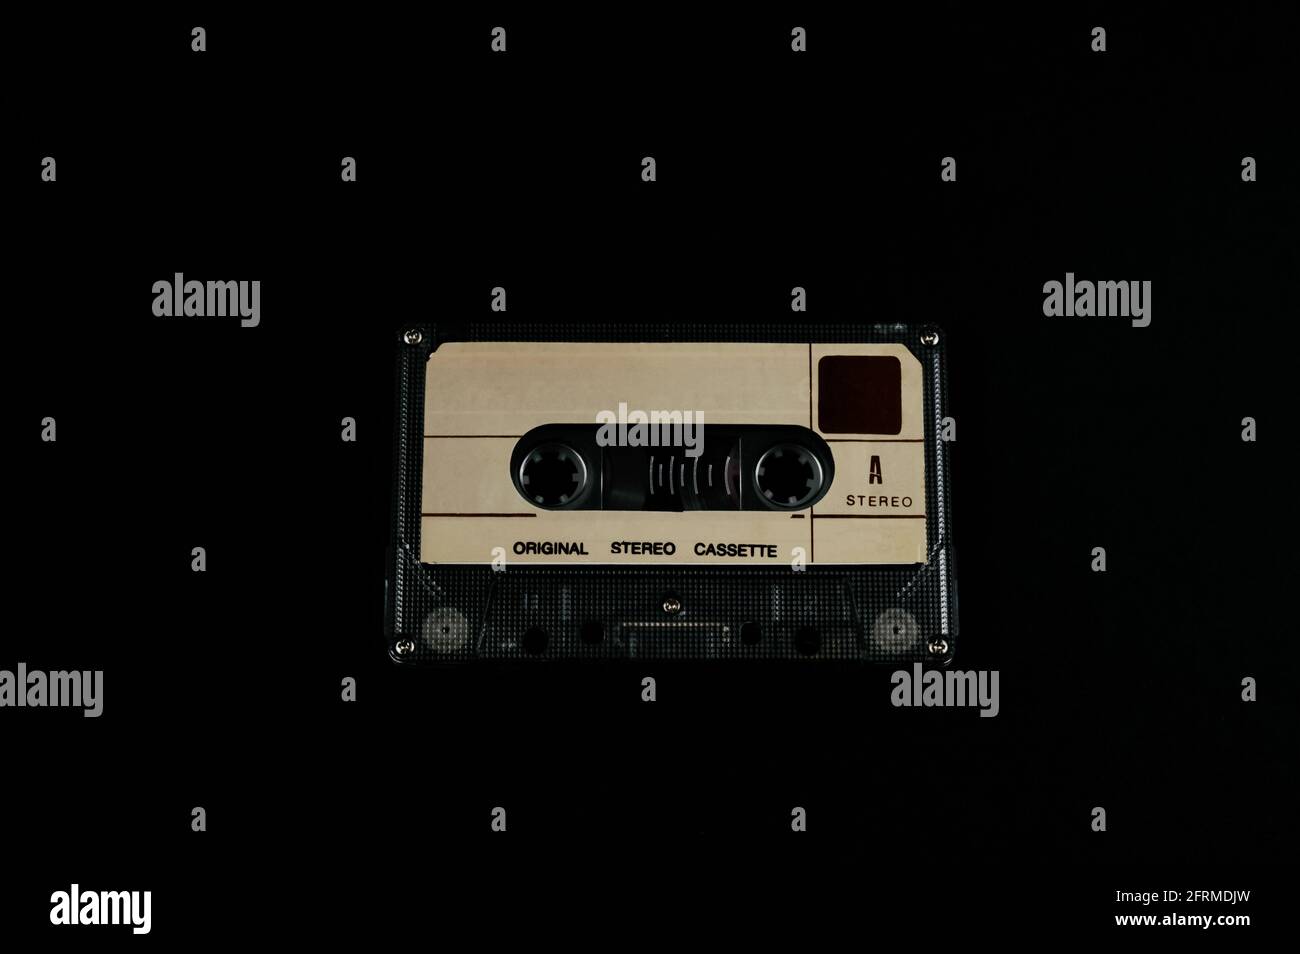 Audio cassette on a black background. Compact tape cassette an analog magnetic tape recording format for audio recording and playback. Stock Photo